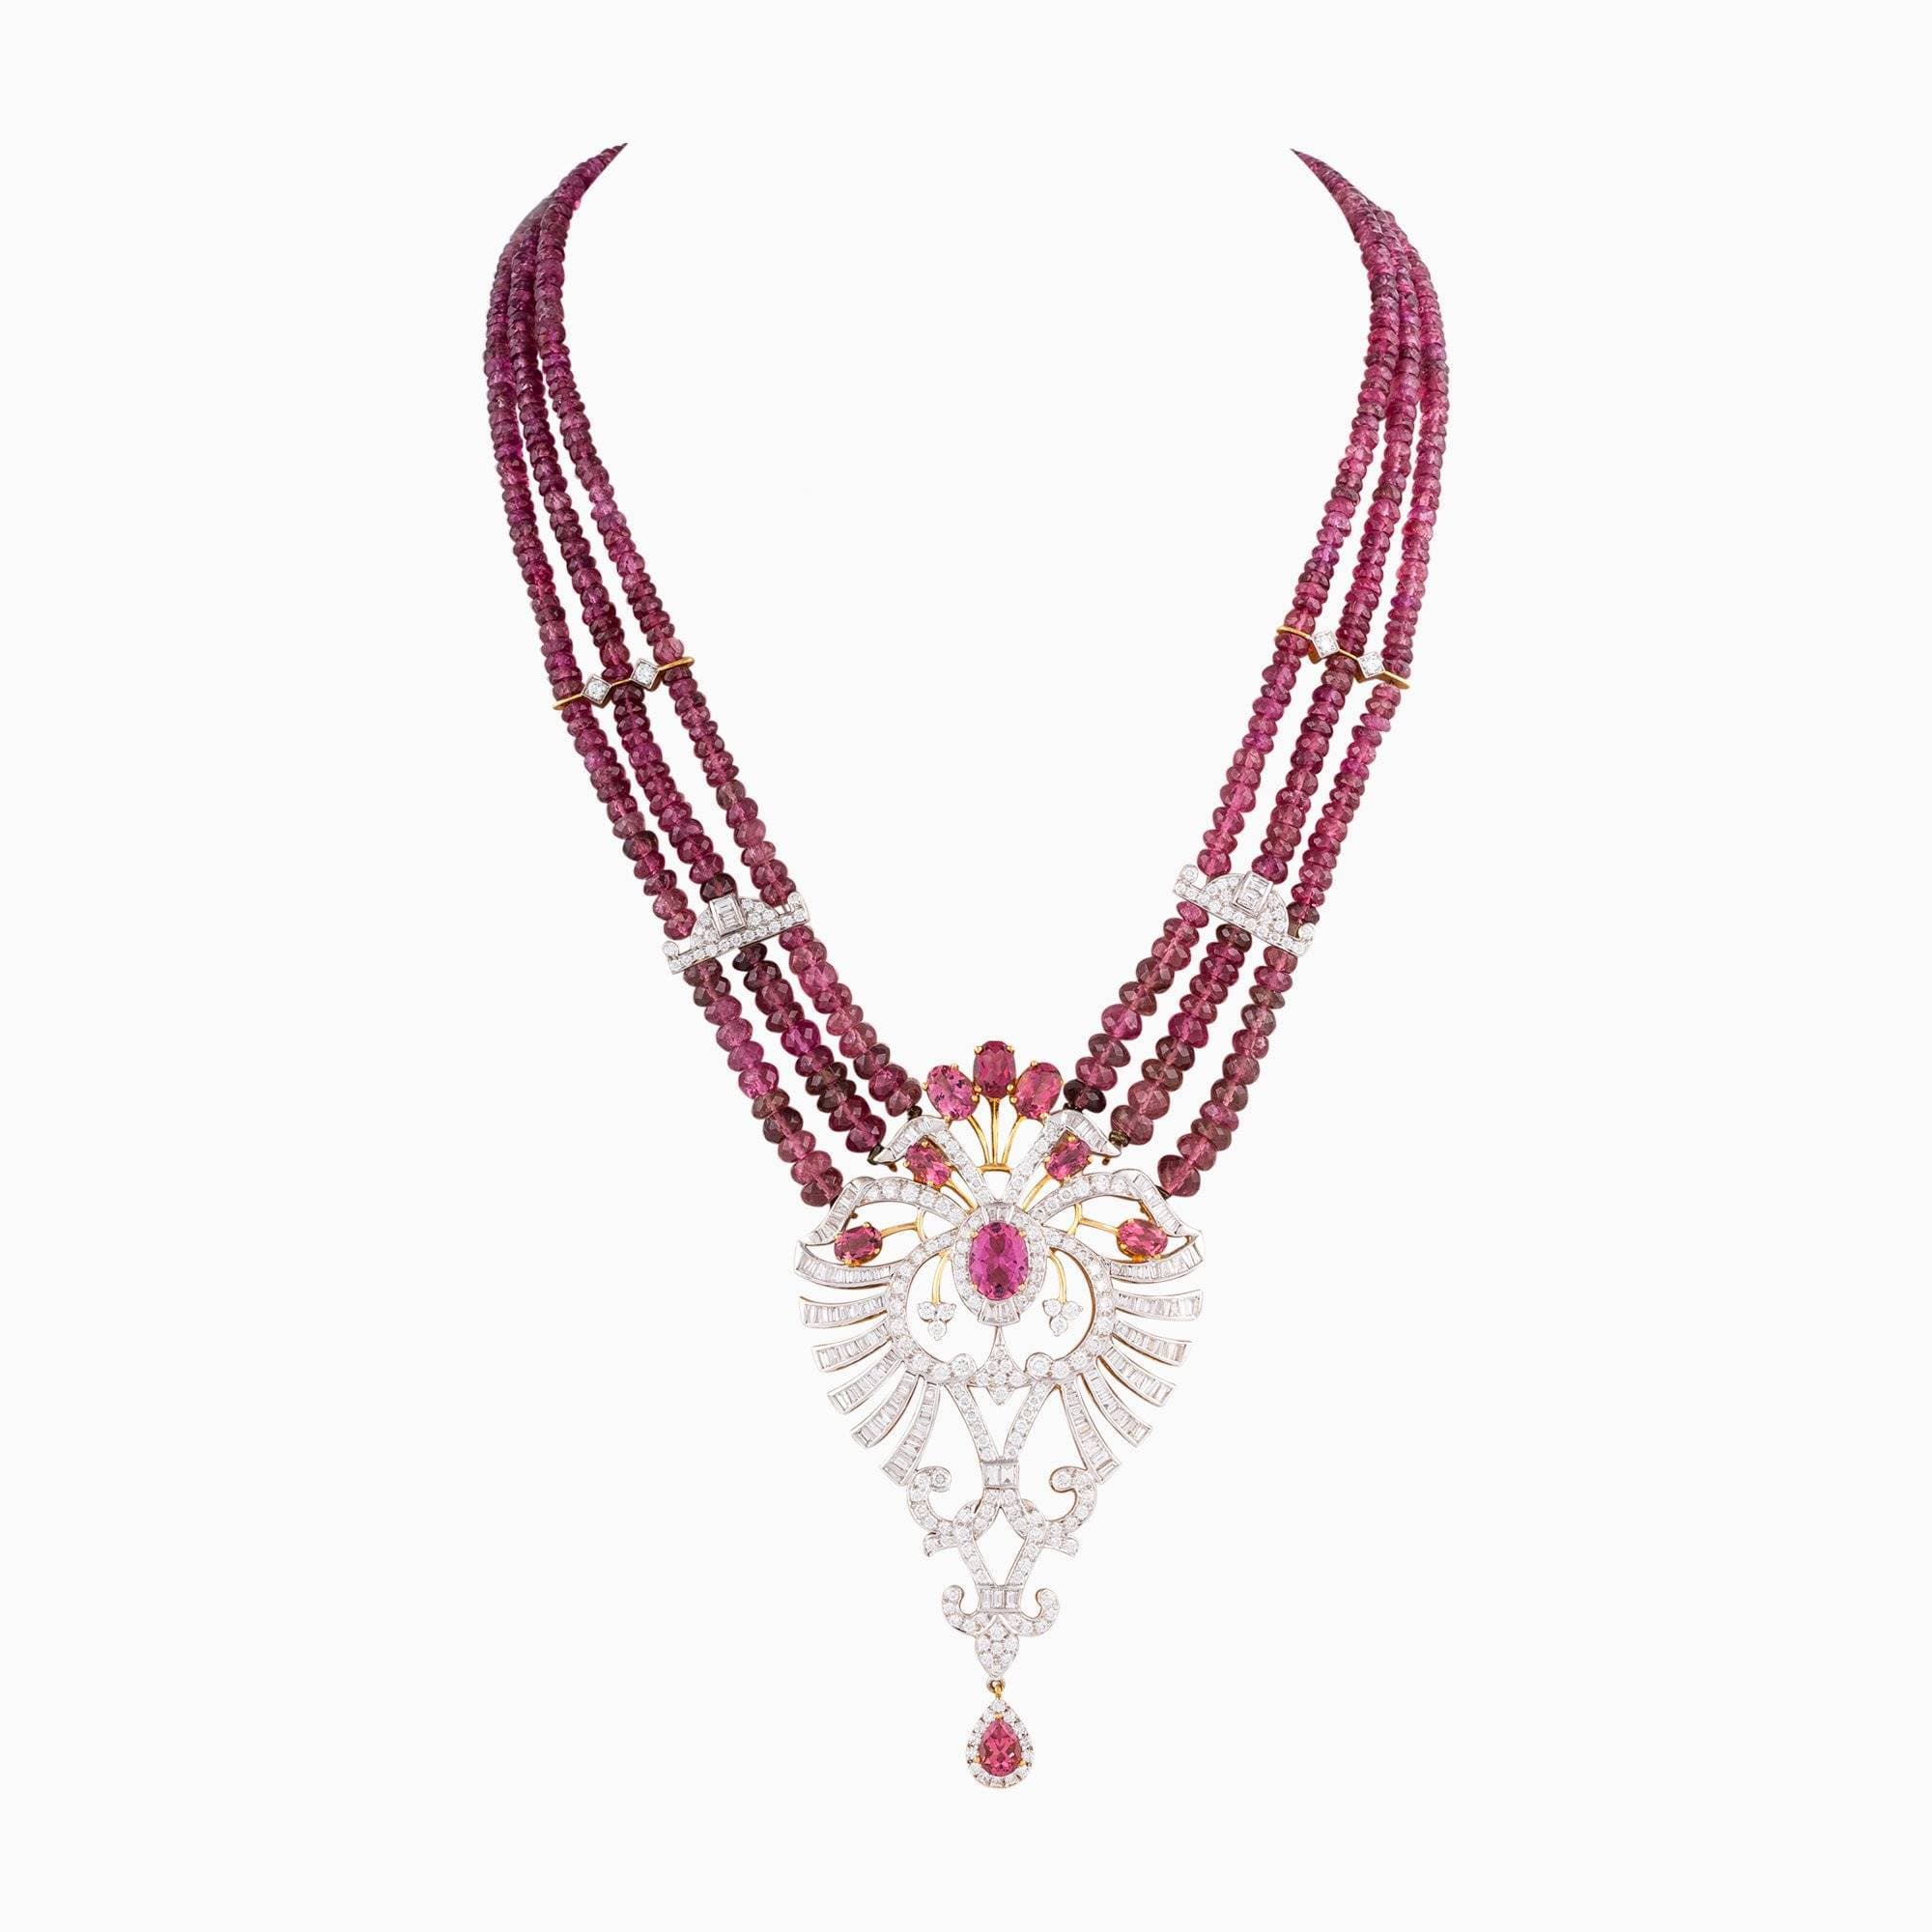 Necklace and Earring Pair with Round Cut Diamond, BG. , Turm Cut Oval, Pear Shaped, Turm Faceted Beads - WDN732